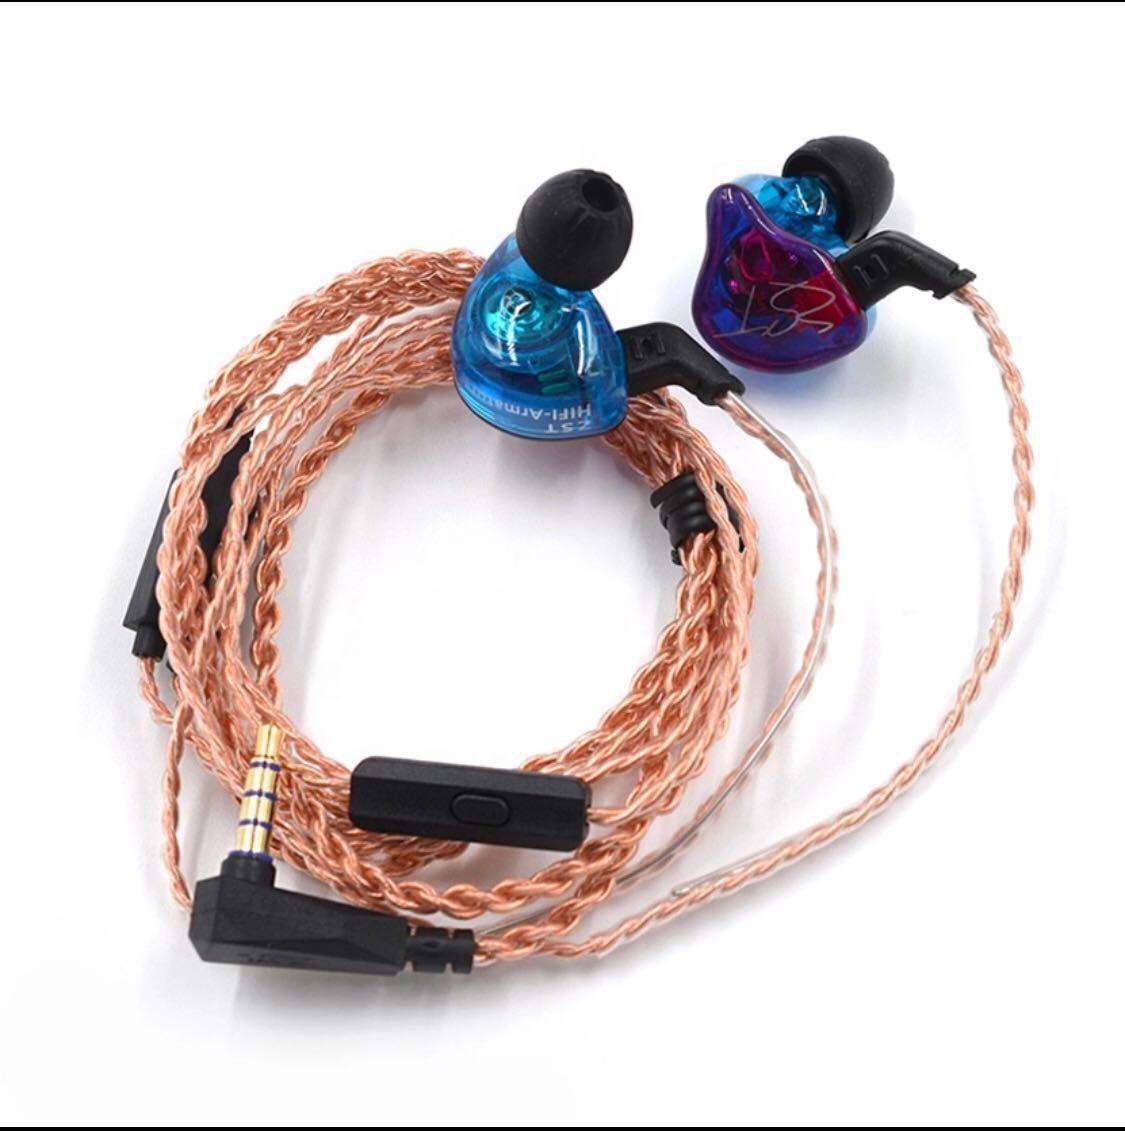 Kz Zst Pro Comes With New Braided Cable Electronics Audio On Carousell